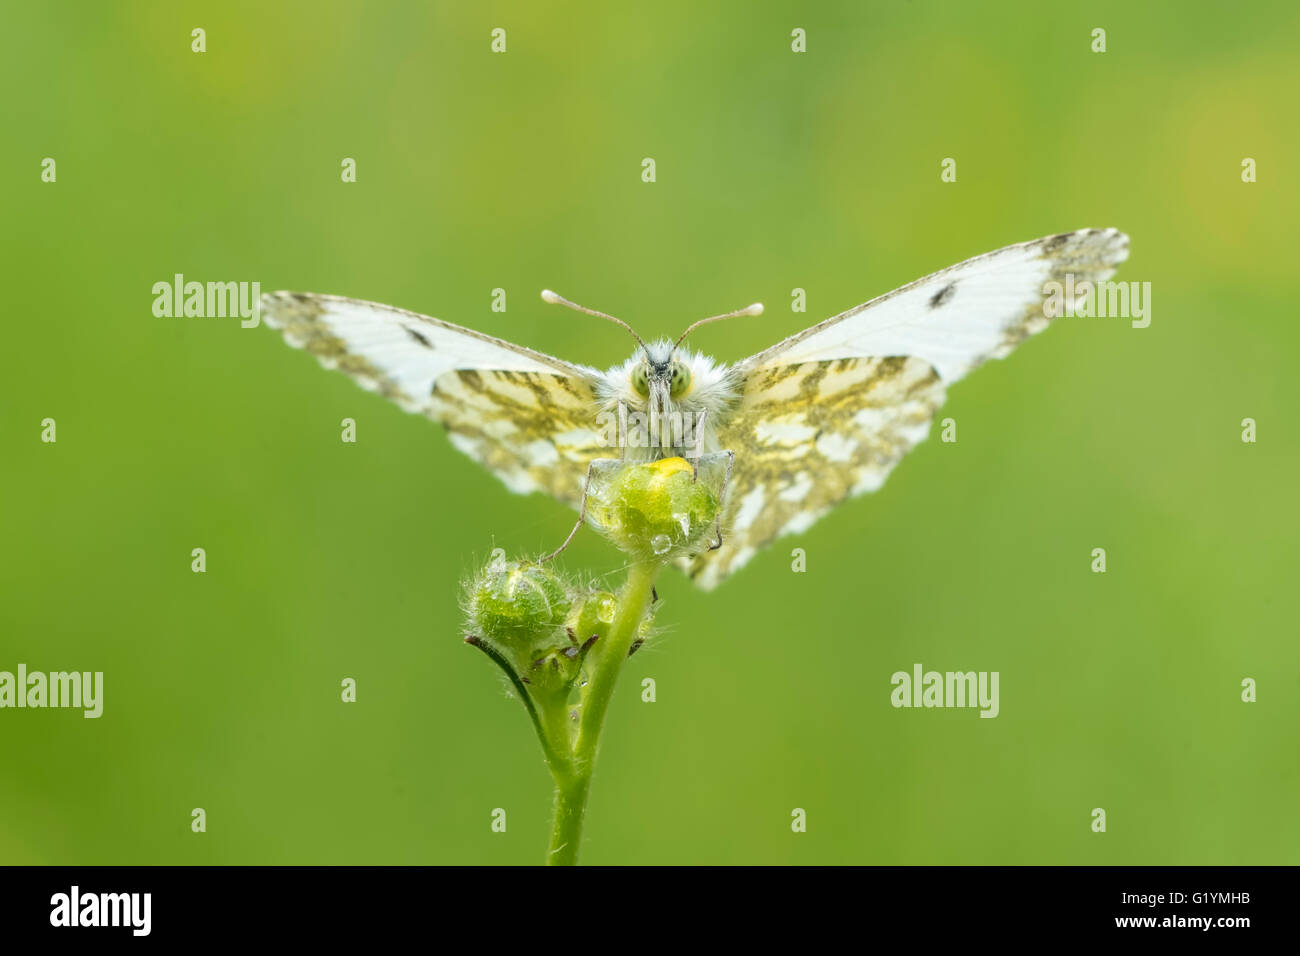 Front view close-up of a Female Orange tip butterfly (anthocharis cardamines) drying her wings in the sun in a meadow during spr Stock Photo